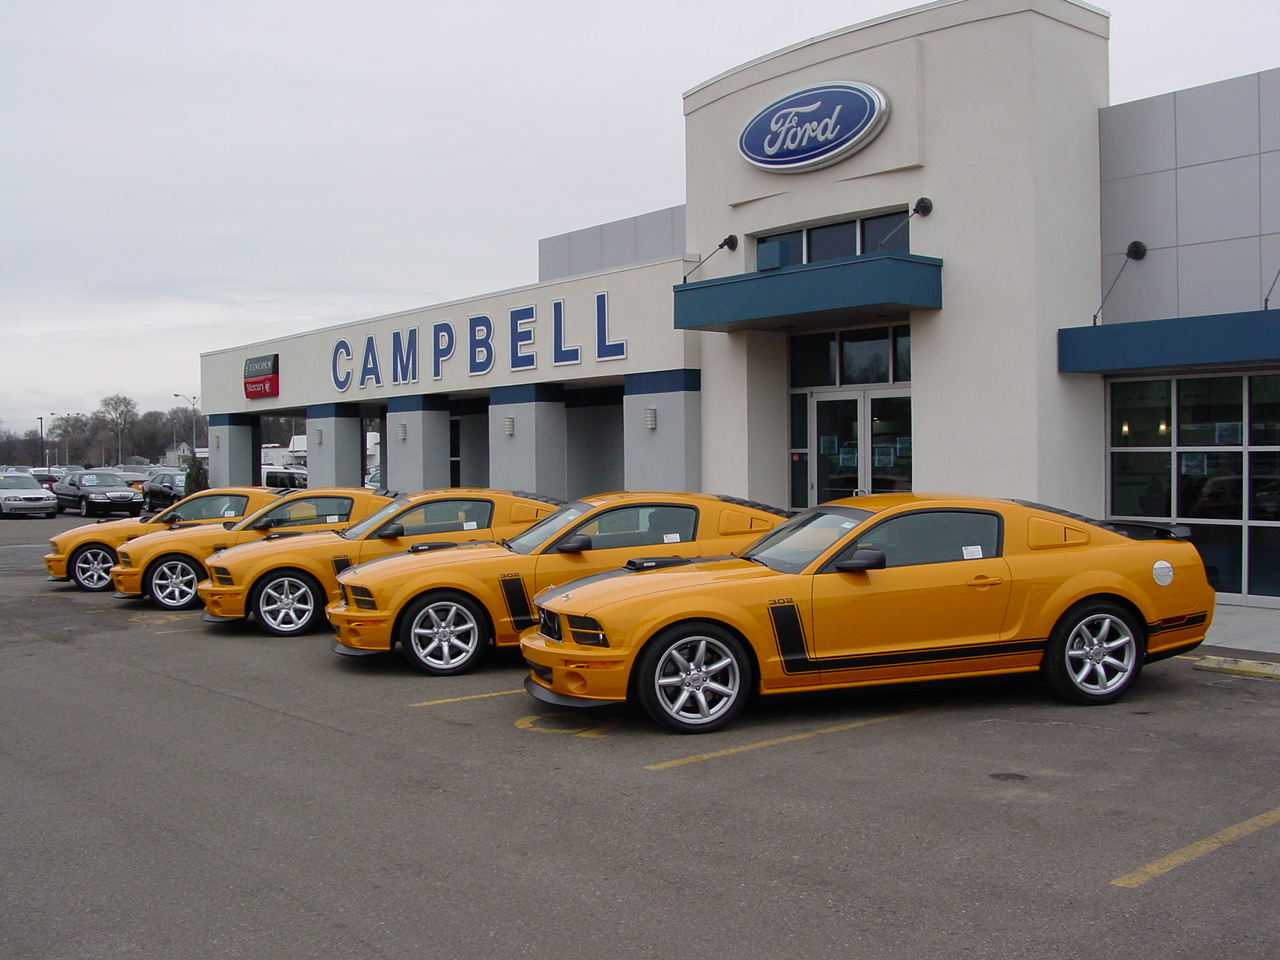 Campbell ford dealership niles mi #1